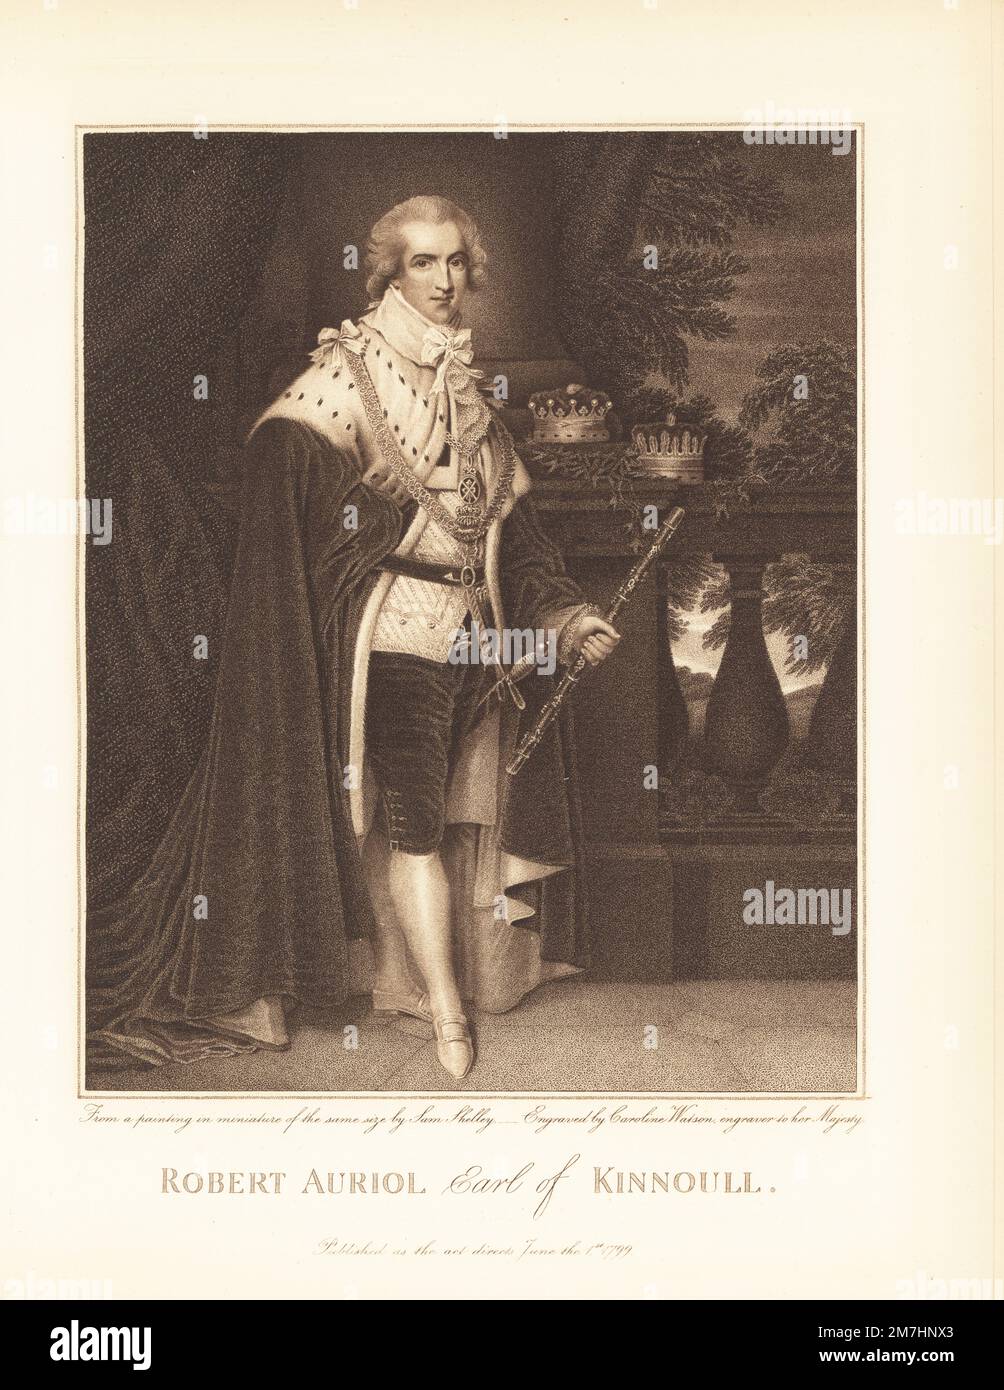 Robert Auriold, 10th Earl of Kinnoull, 1751-1804. Robert Hay-Drummond, Scottish peer and Lord Lyon King of Arms in coronation robes: ermine mantle, waistcoat, breeches, hose and buckle shoes, with coronets, collar, sword and baton. Copperplate stipple engraving by Caroline Watson after a miniature portrait by Samuel Shelley from Andrew W. Tuer's Bartolozzi and his Works, Field and Tuer, London, 1881. Stock Photo